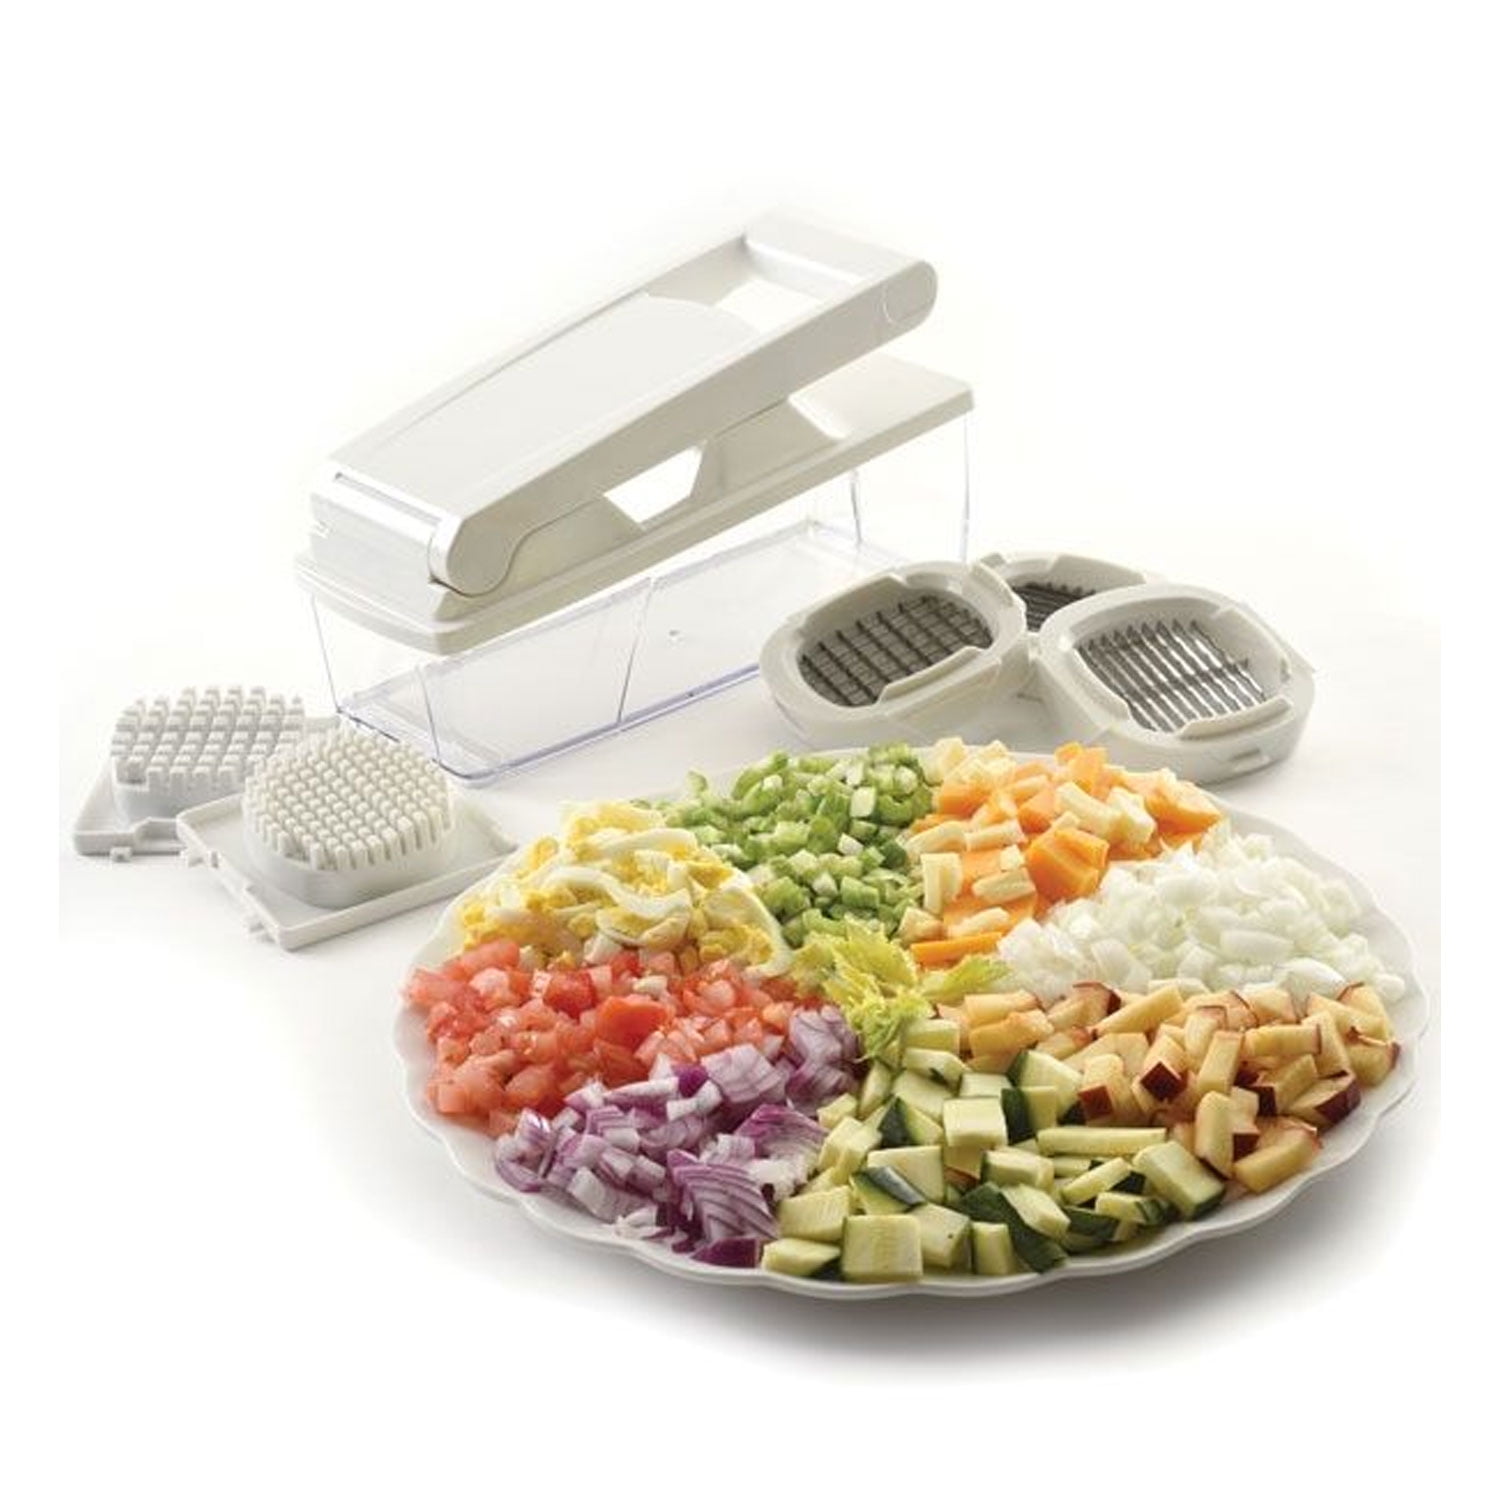 Norpro 846 Multi Chopper with 3 Interchangeable Blades, One Size, White